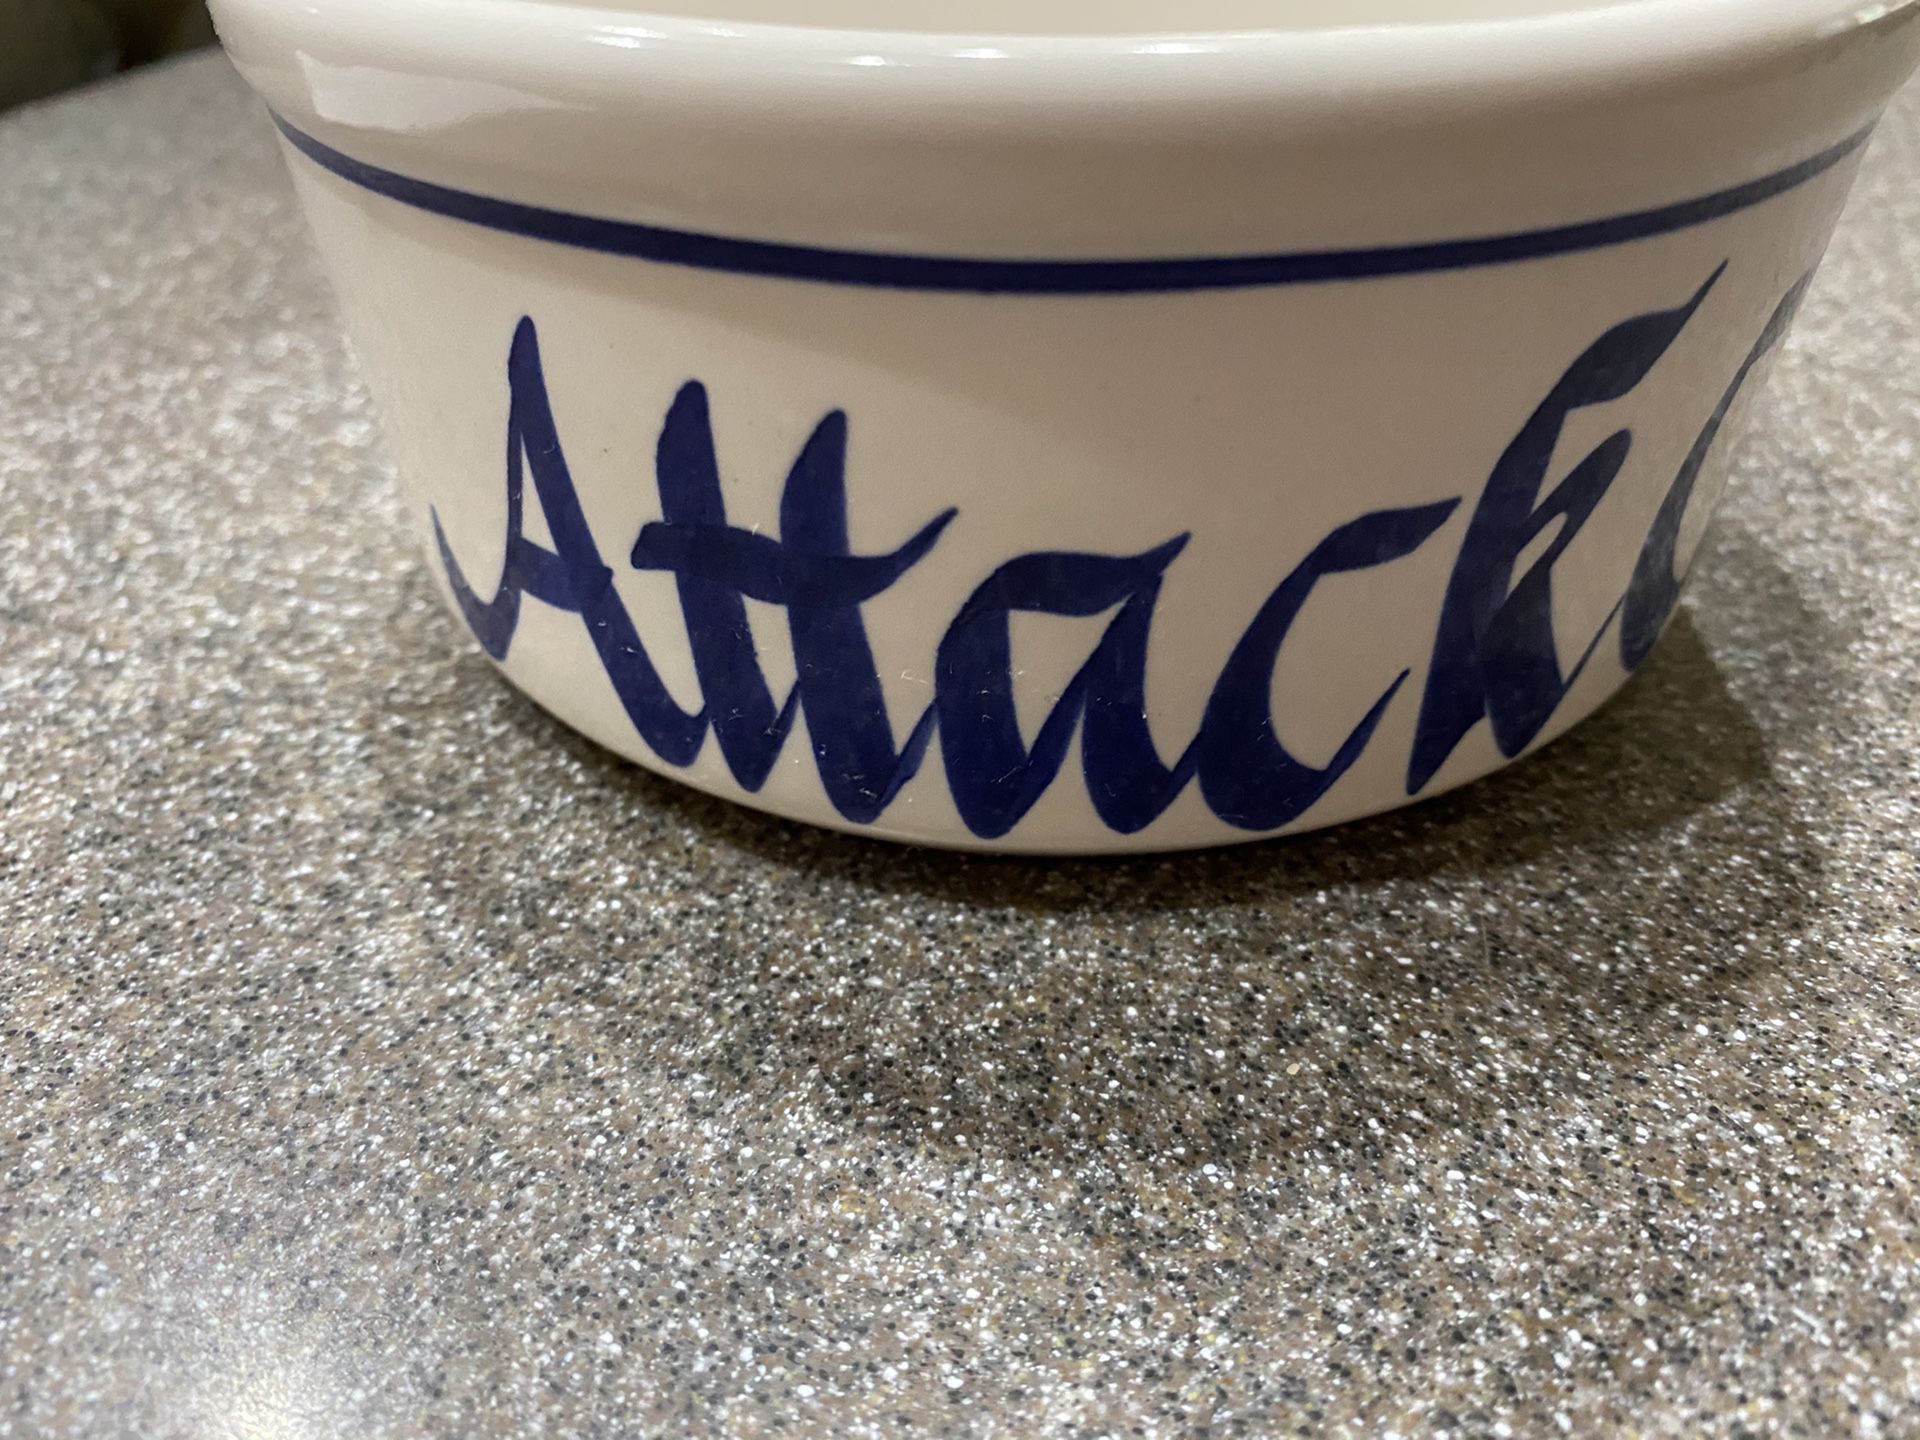 CAT Bowl “ATTACK CAT” in Blue Calligraphy Writing